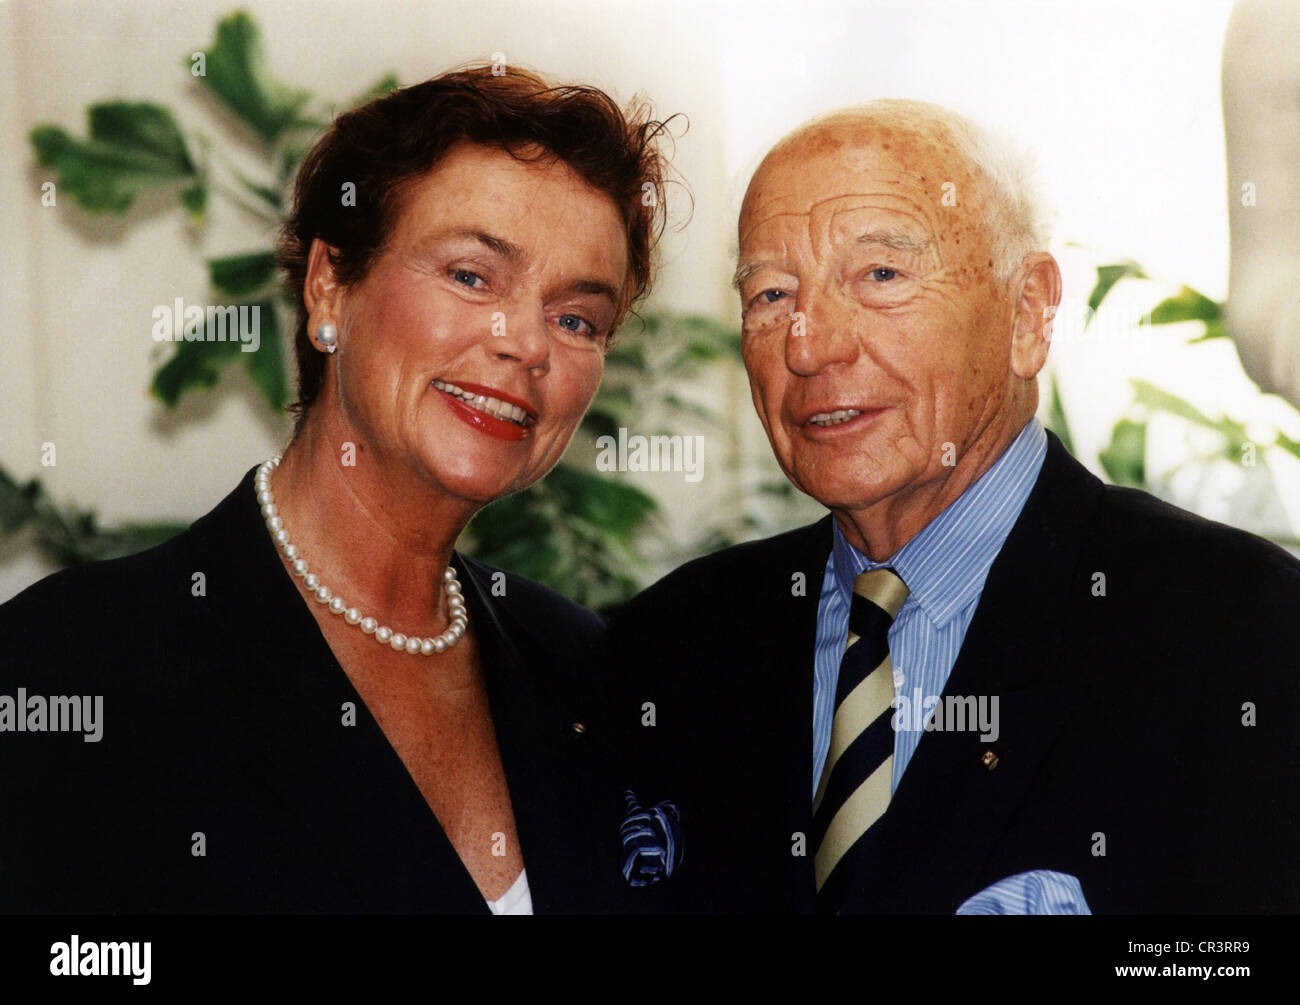 Scheel Walter 8.7.1919 - 24.8.2016, German politician (FDP), portrait, with his wife Barbara, on occasion of his 60th birthday in Berlin, 12.7.1999, Stock Photo